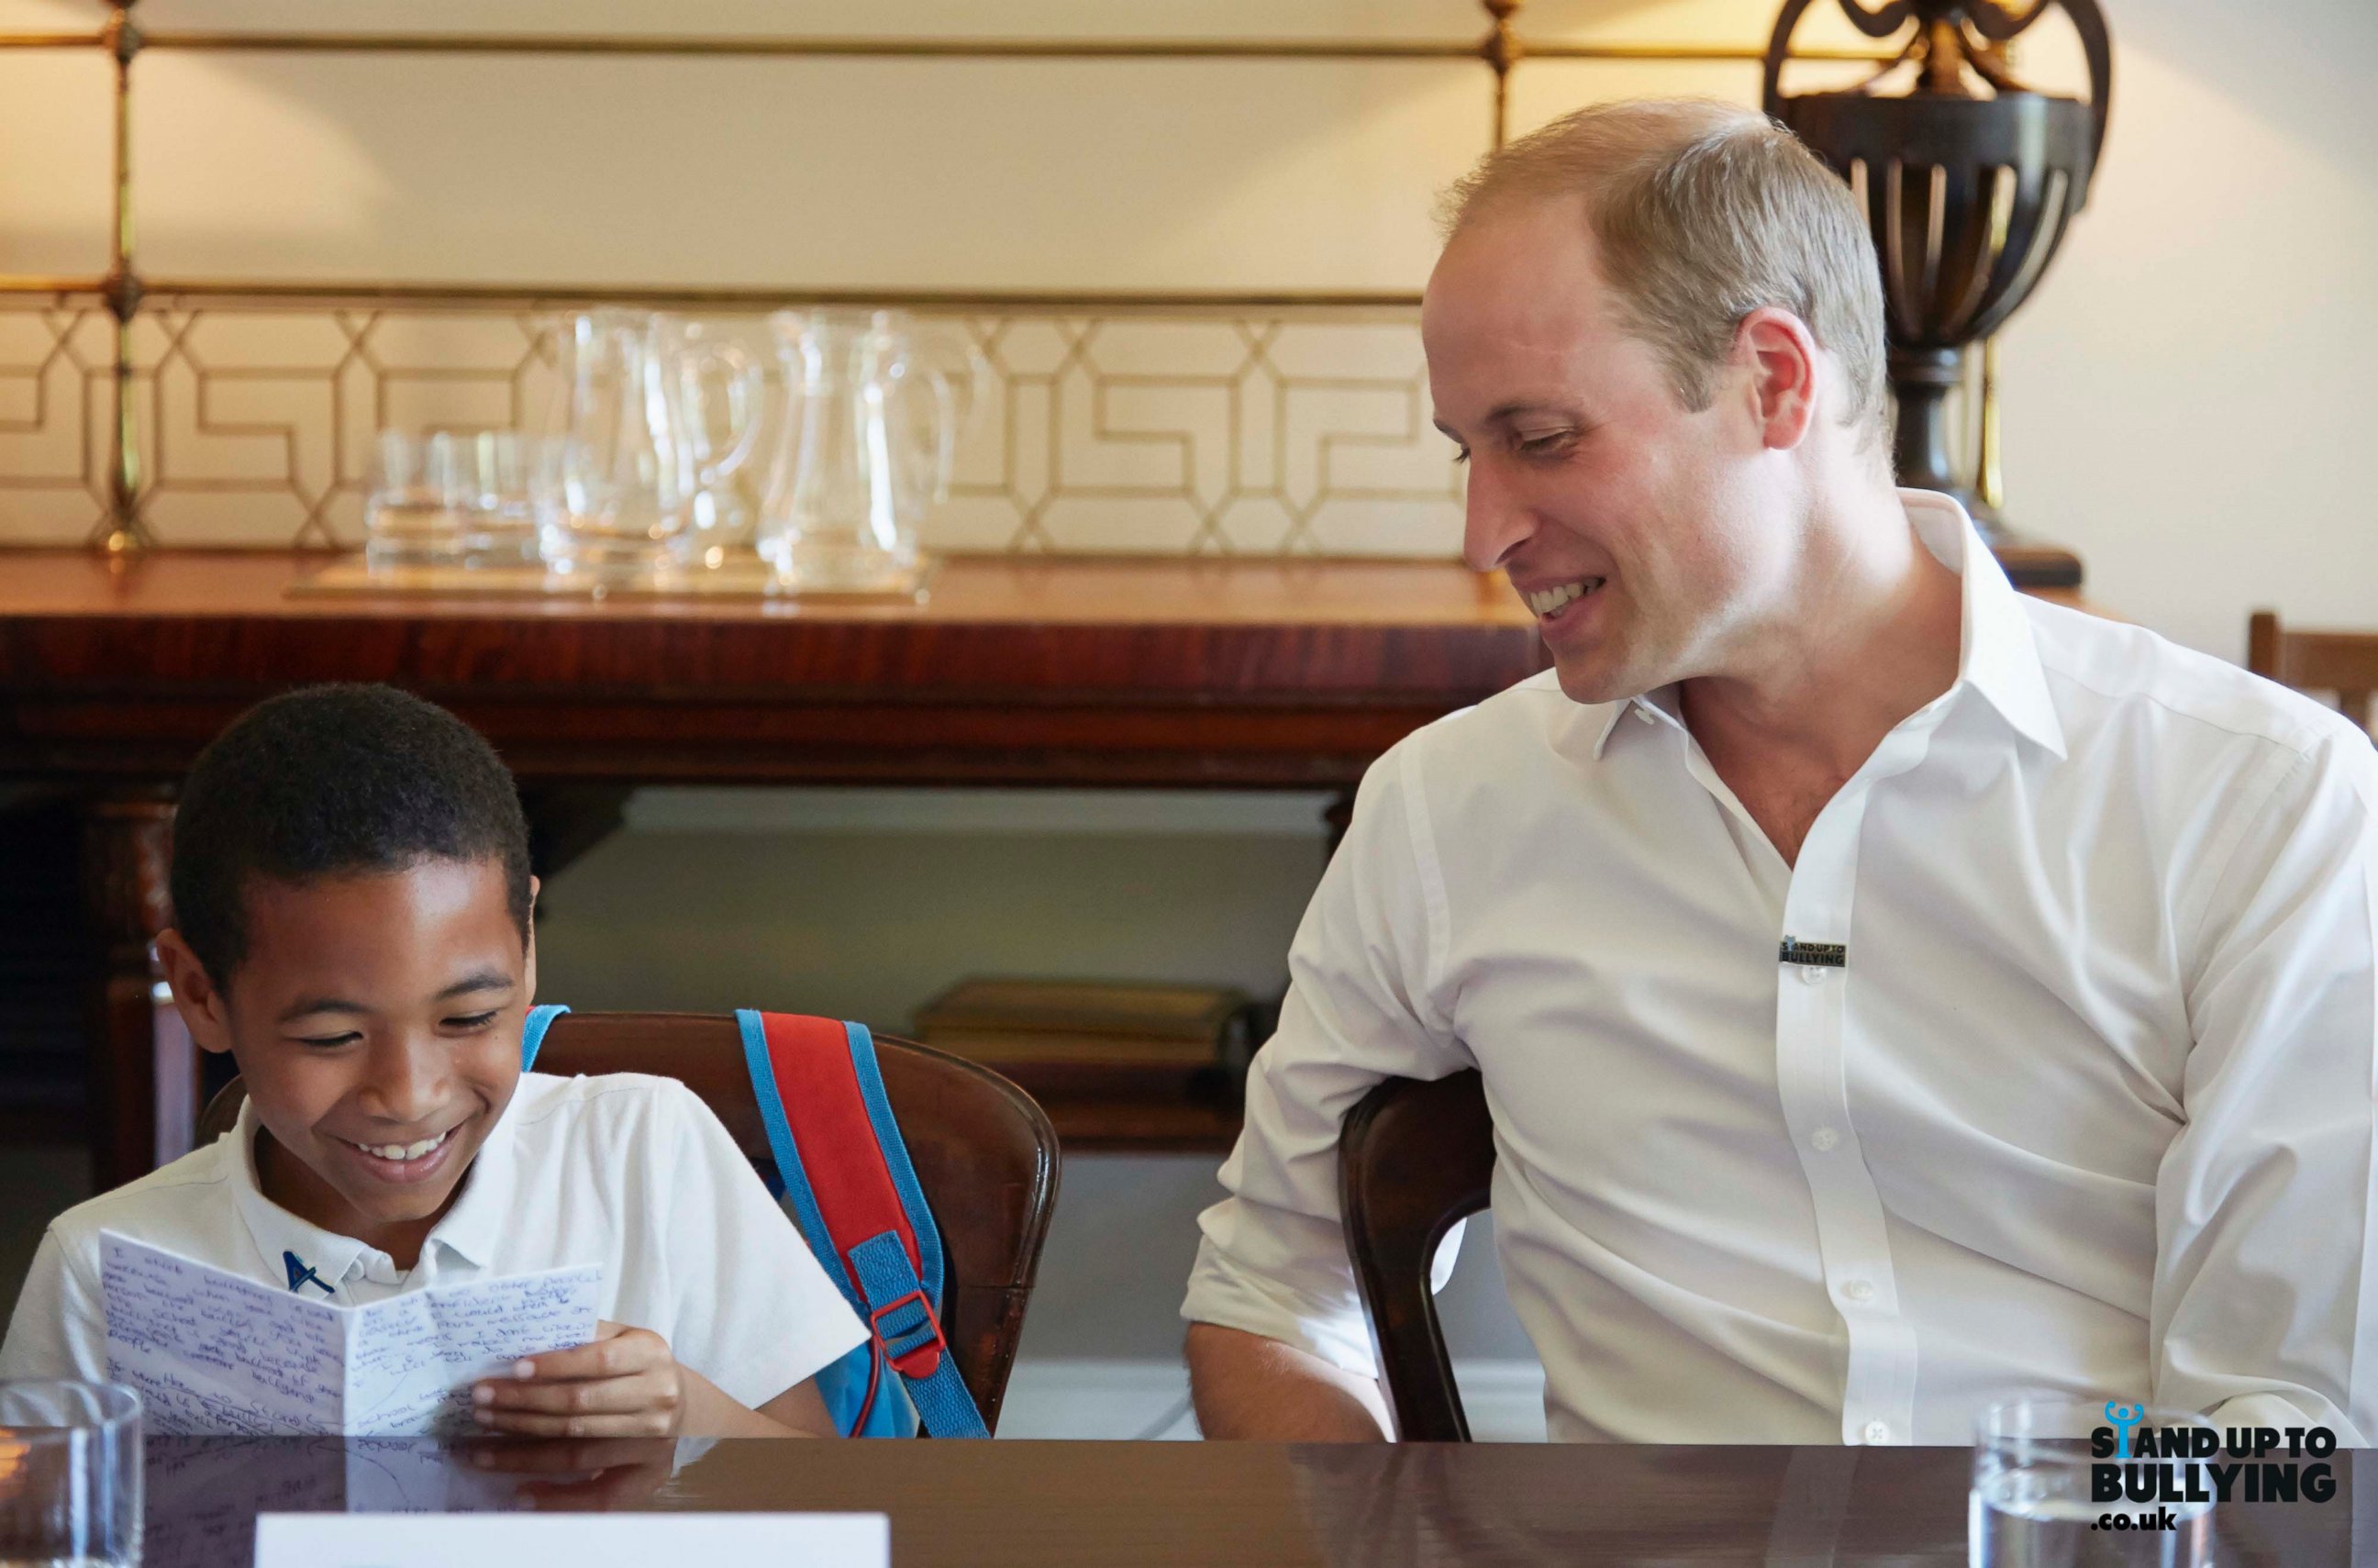 PHOTO: Prince William’s Anti-Bulling PSA: Time to Stand Up to Bullies, Not Stand By